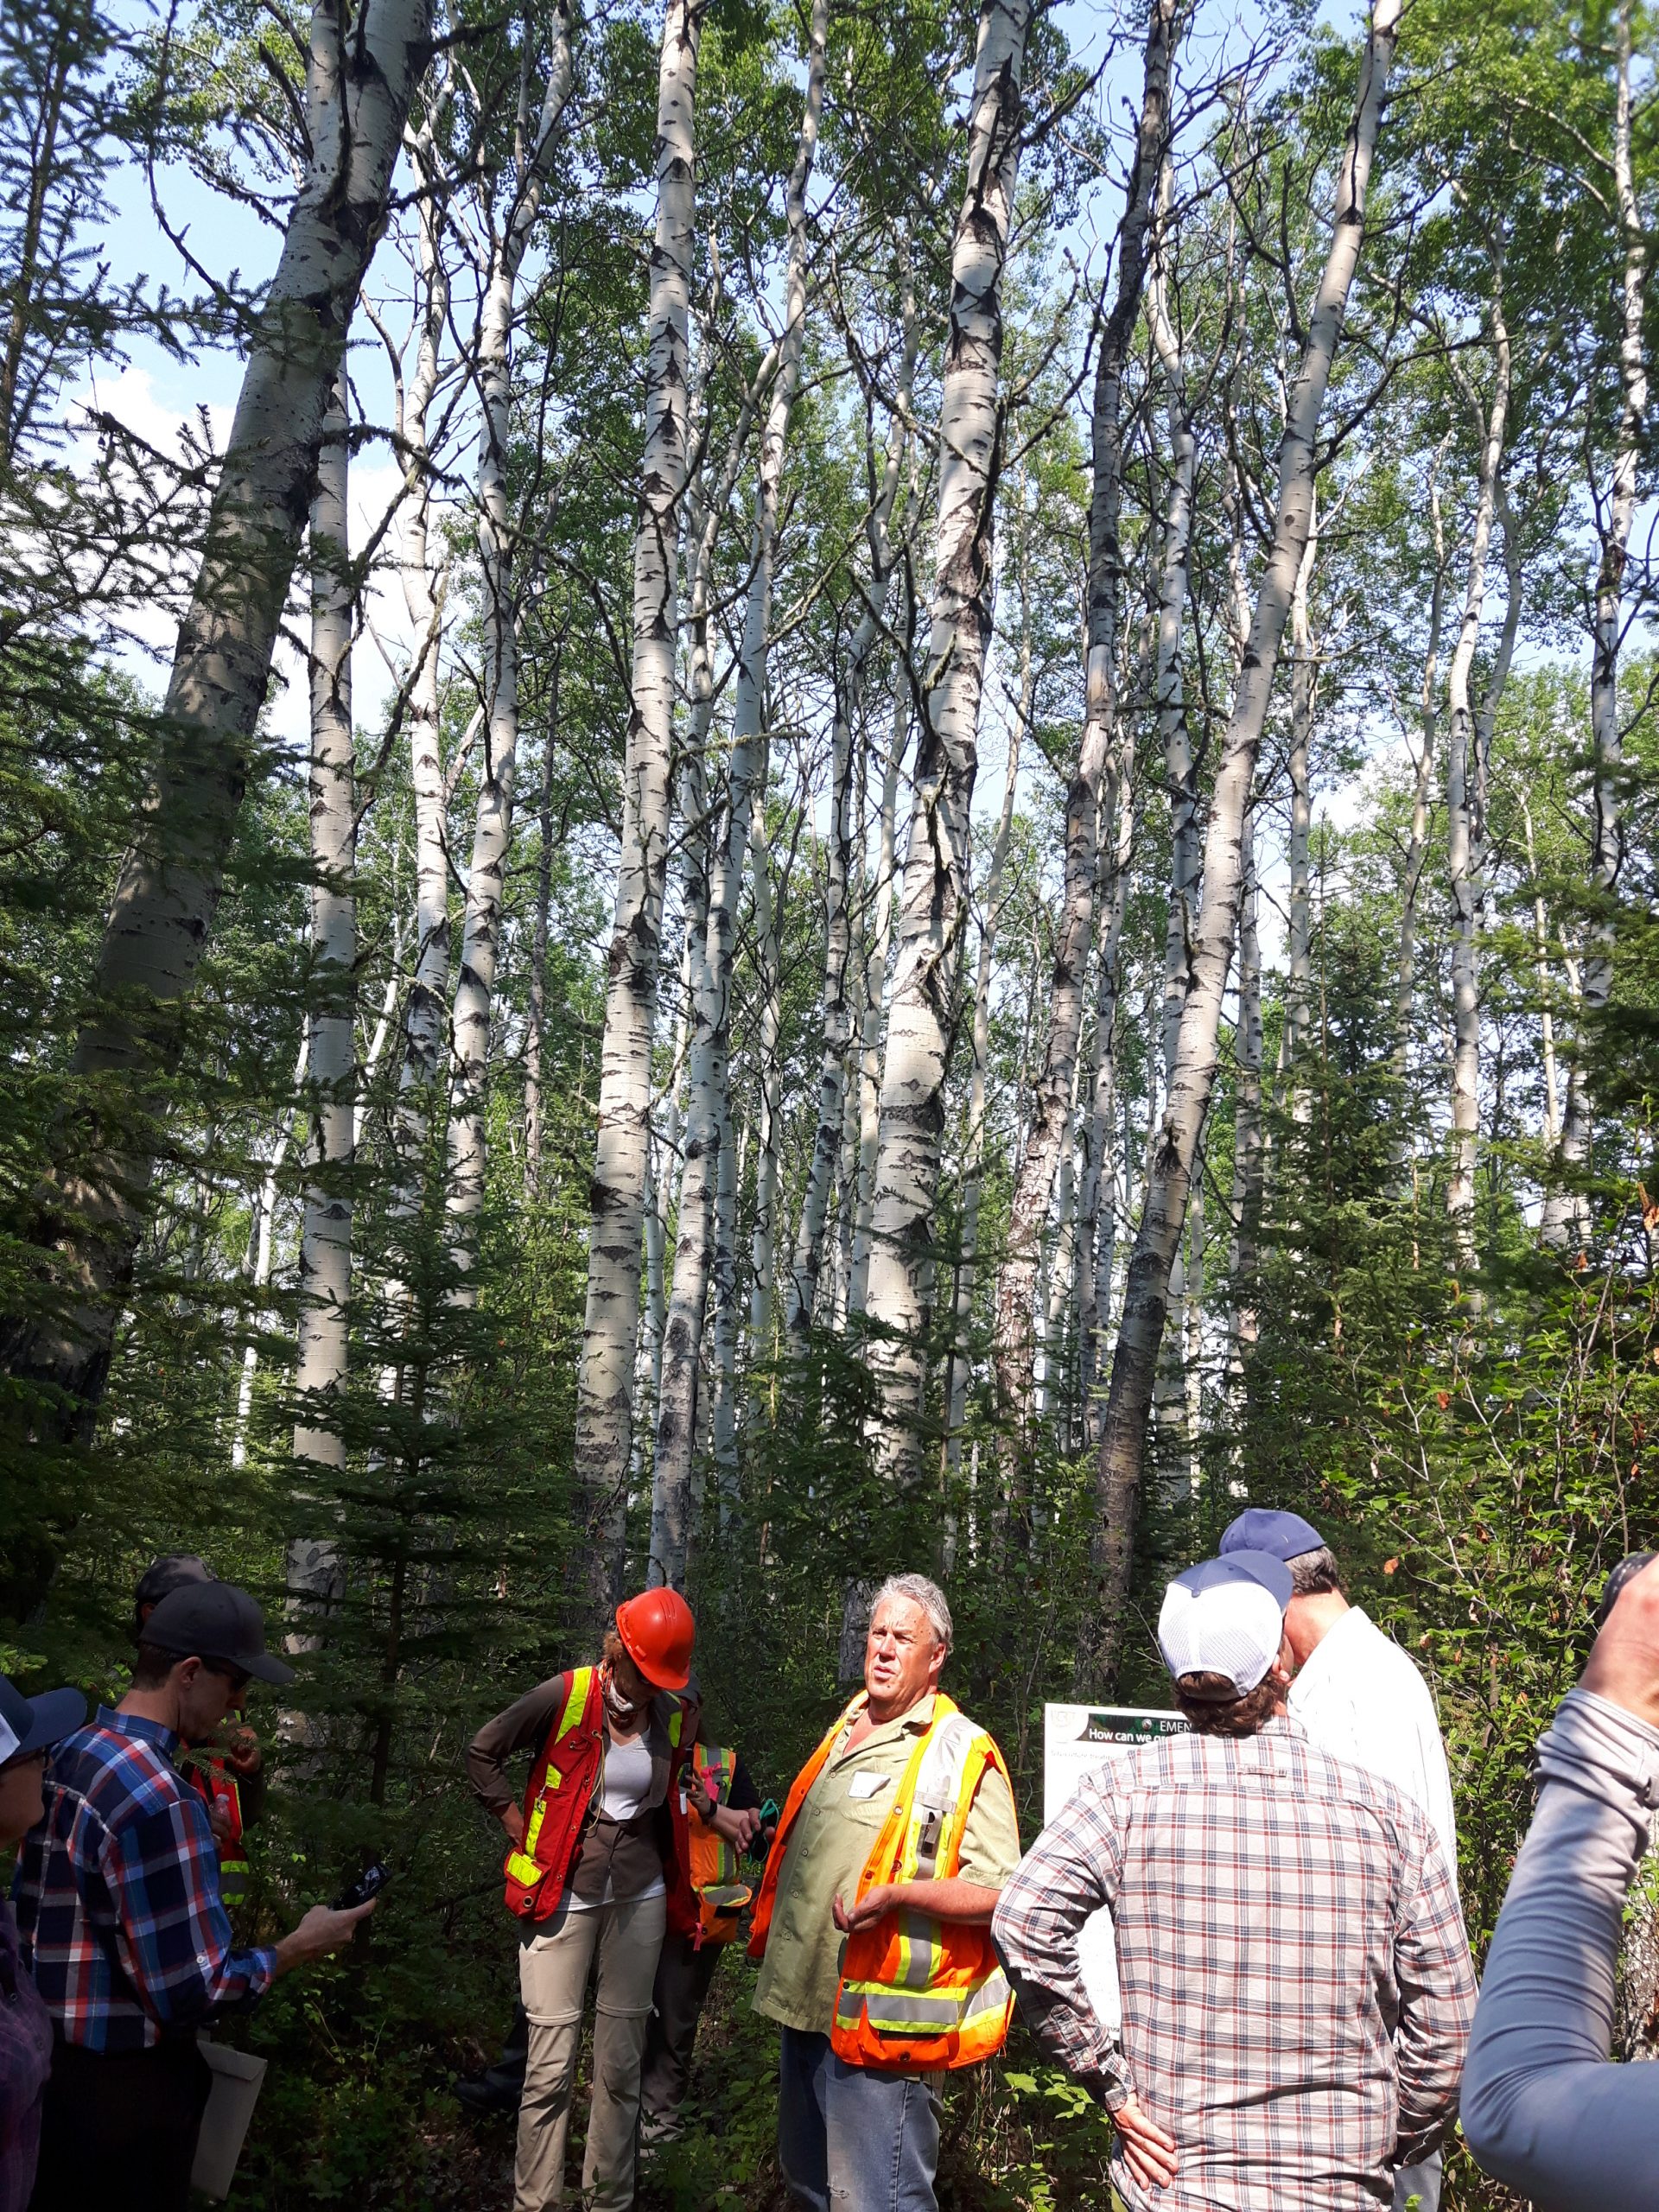 A group of foresters touring an experimental forest